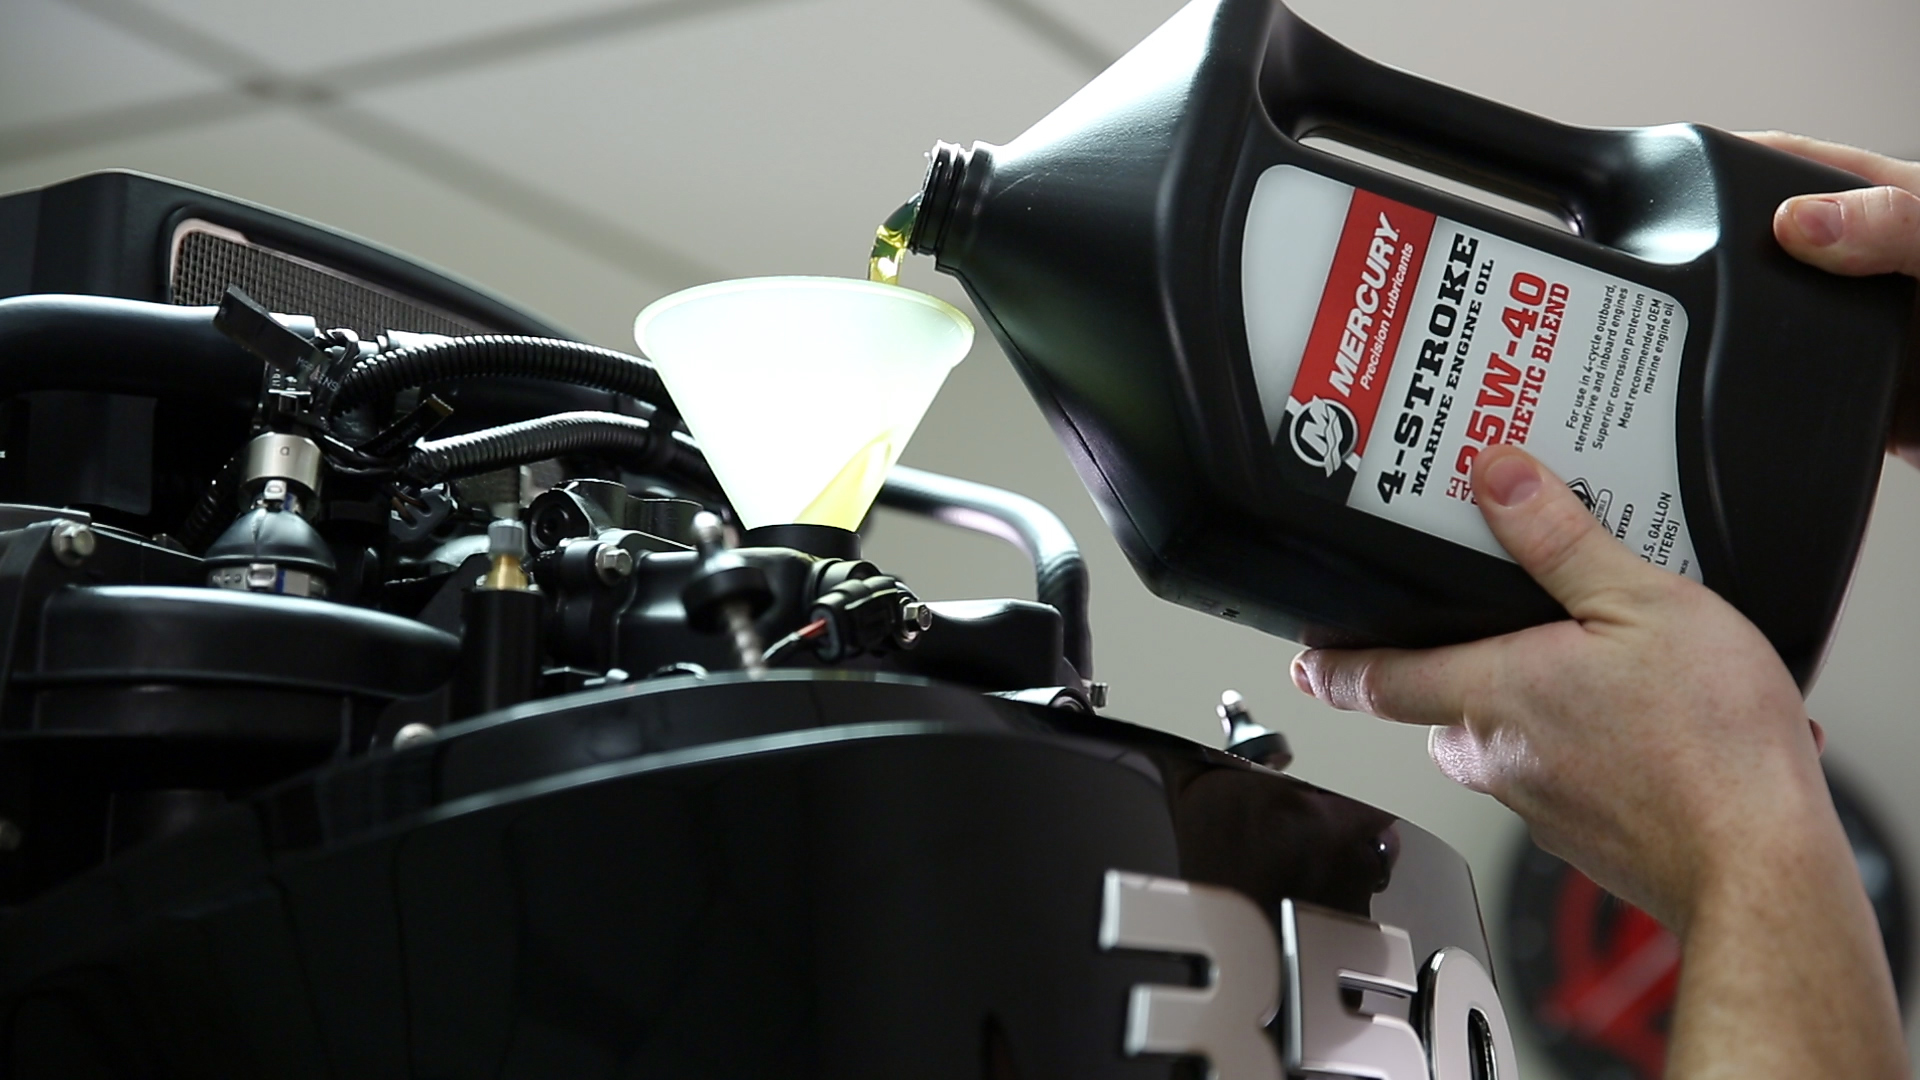 The Outboard Expert: Outboard Oil Facts and Myths